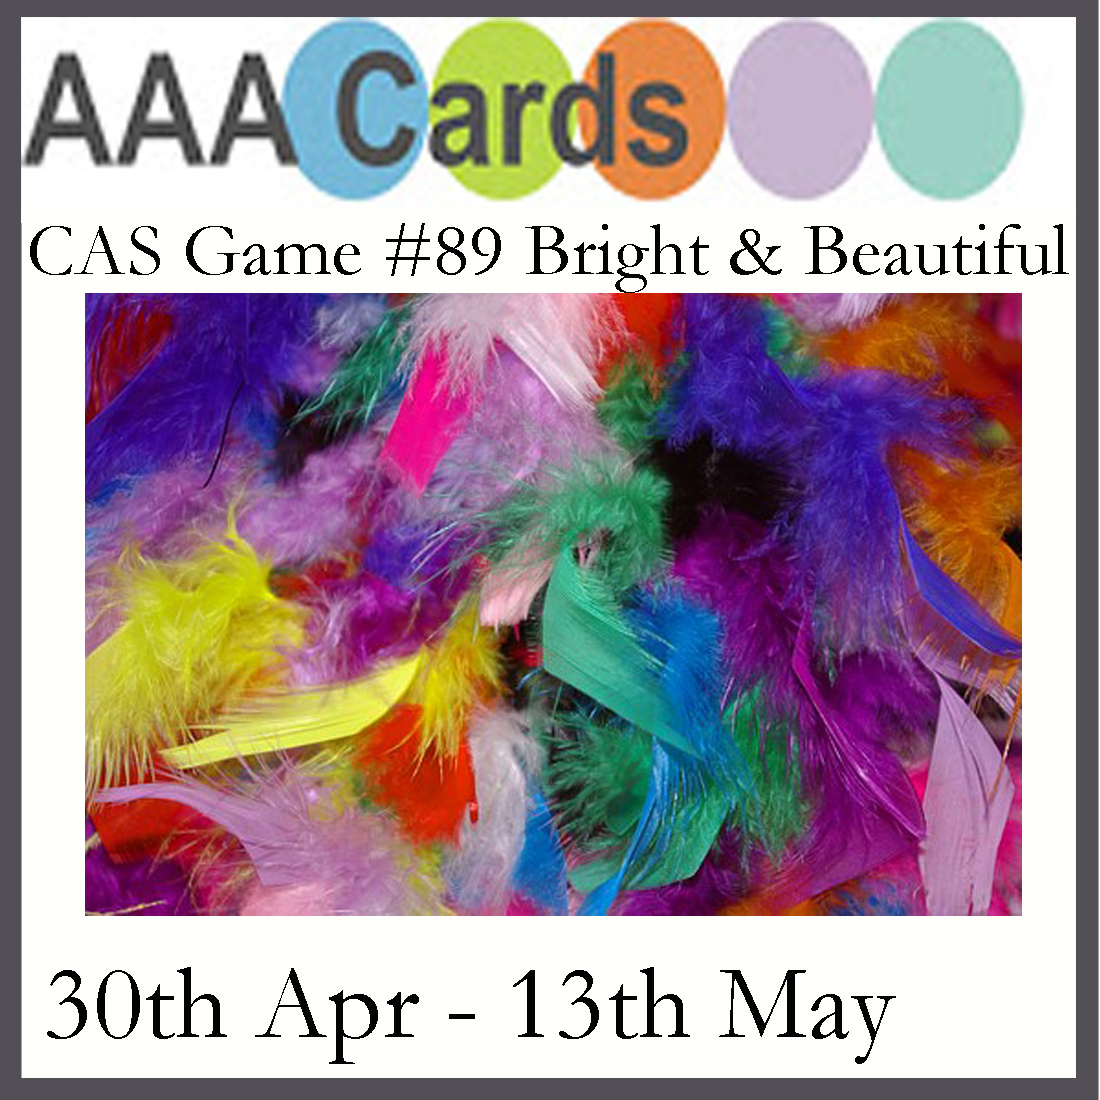 CAS Cards Challenge. AAA Card.